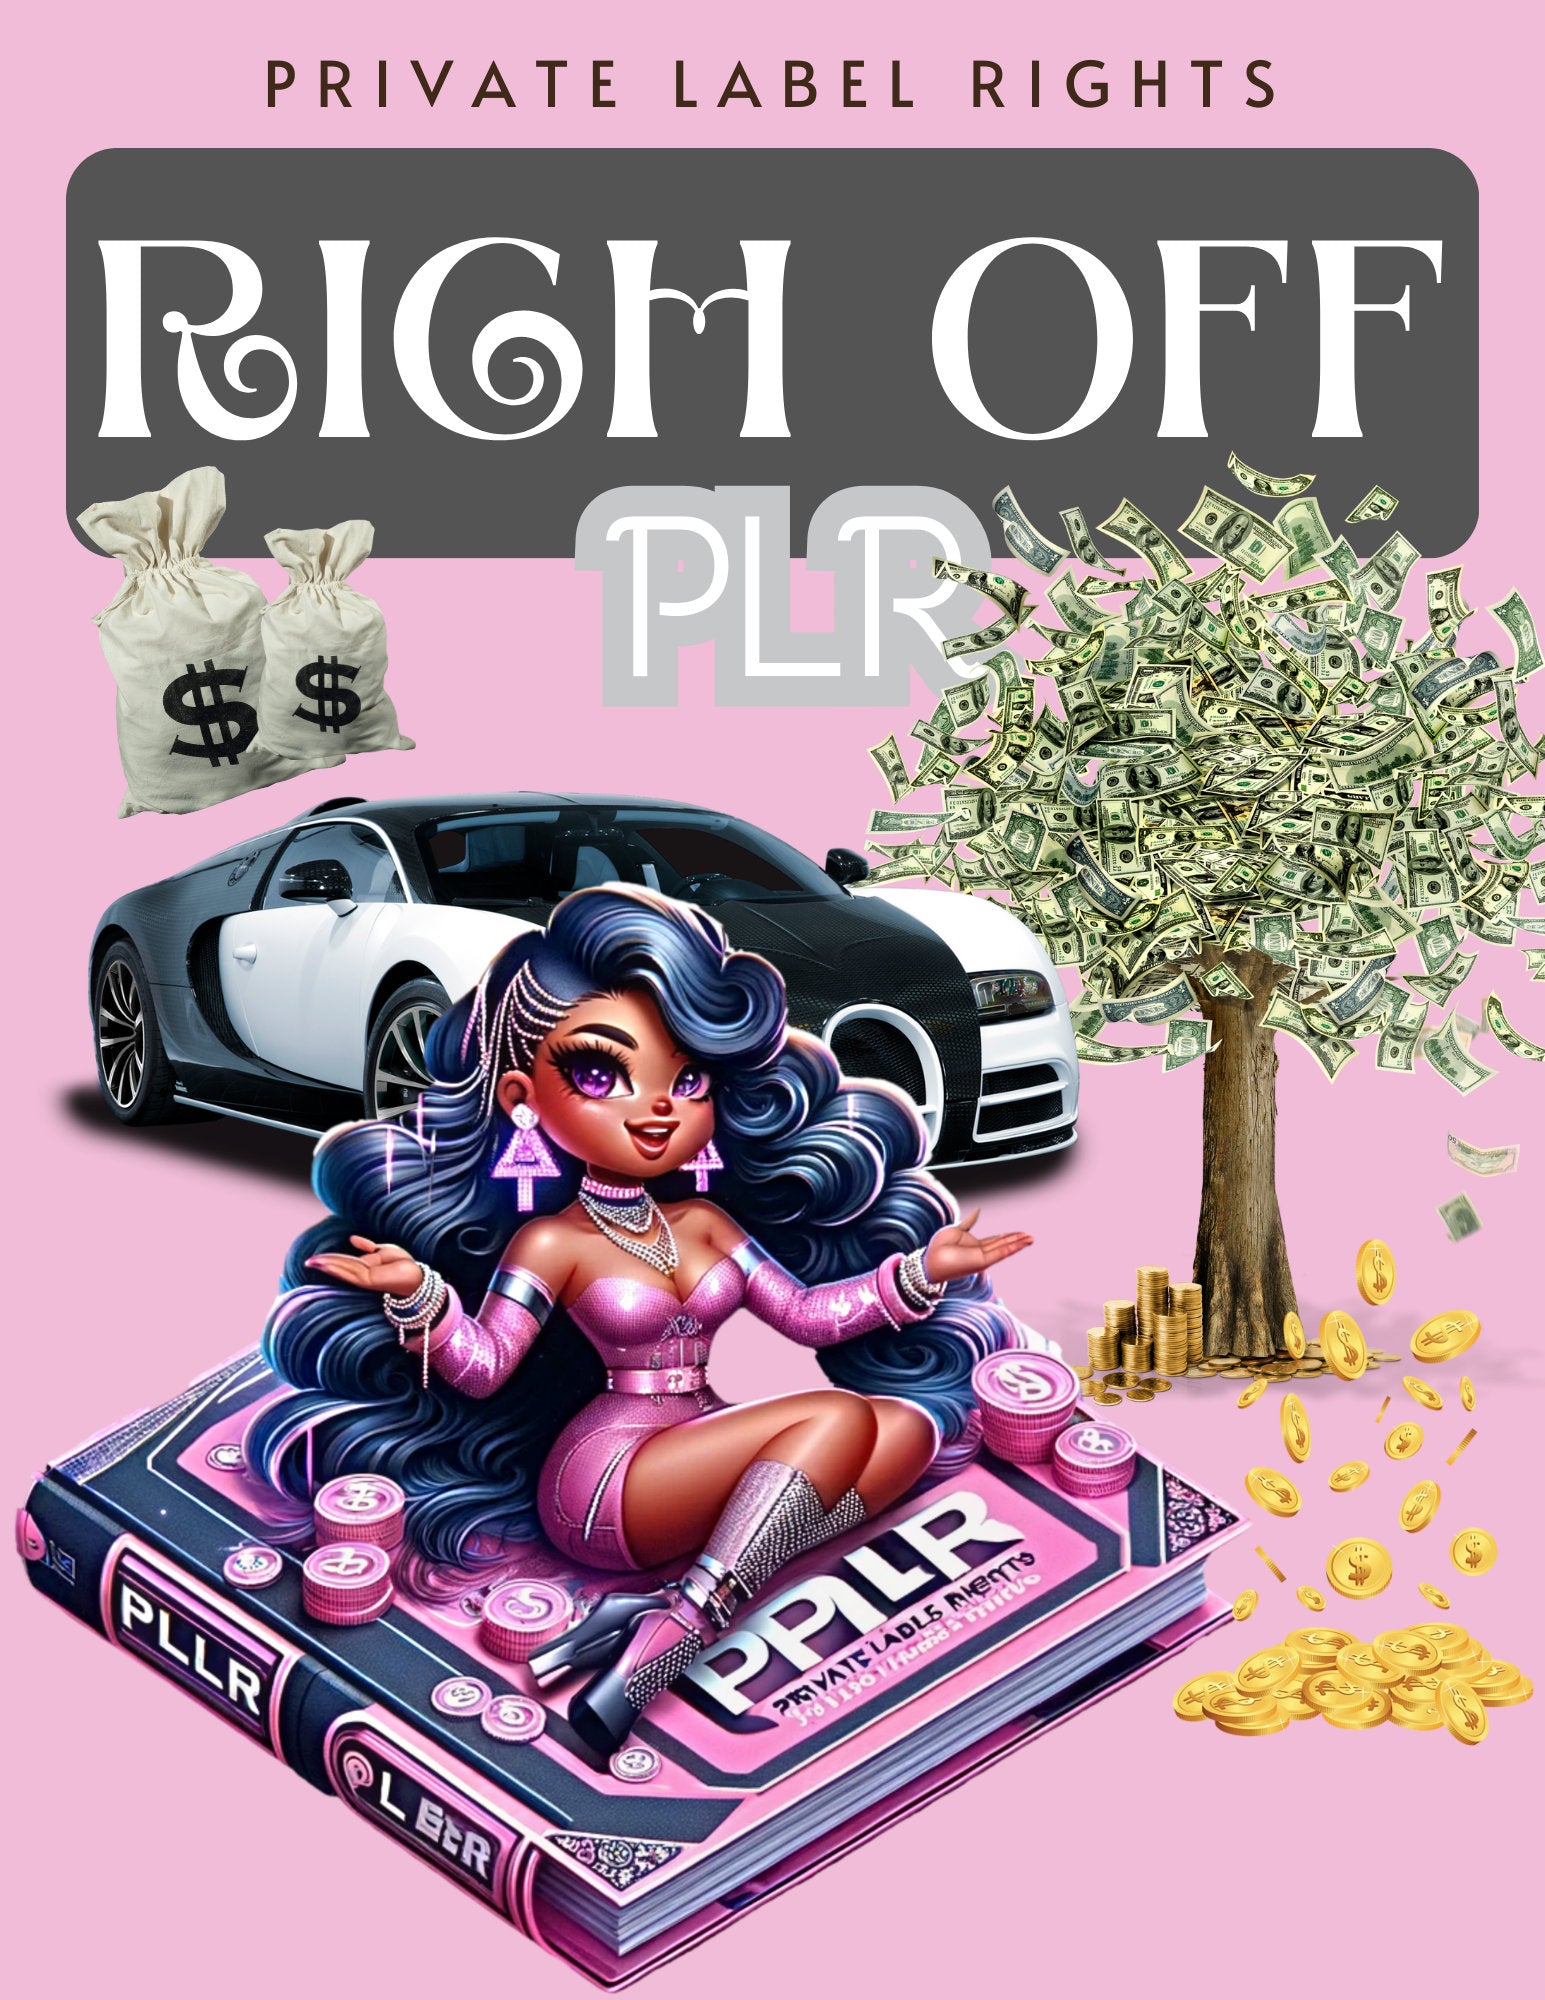 RICH Off PLR E-Book, Your options, What is it? Rights, Make Money, AI, Rewrite Content, Resell Tips & Strategies, Selling Digital Products.